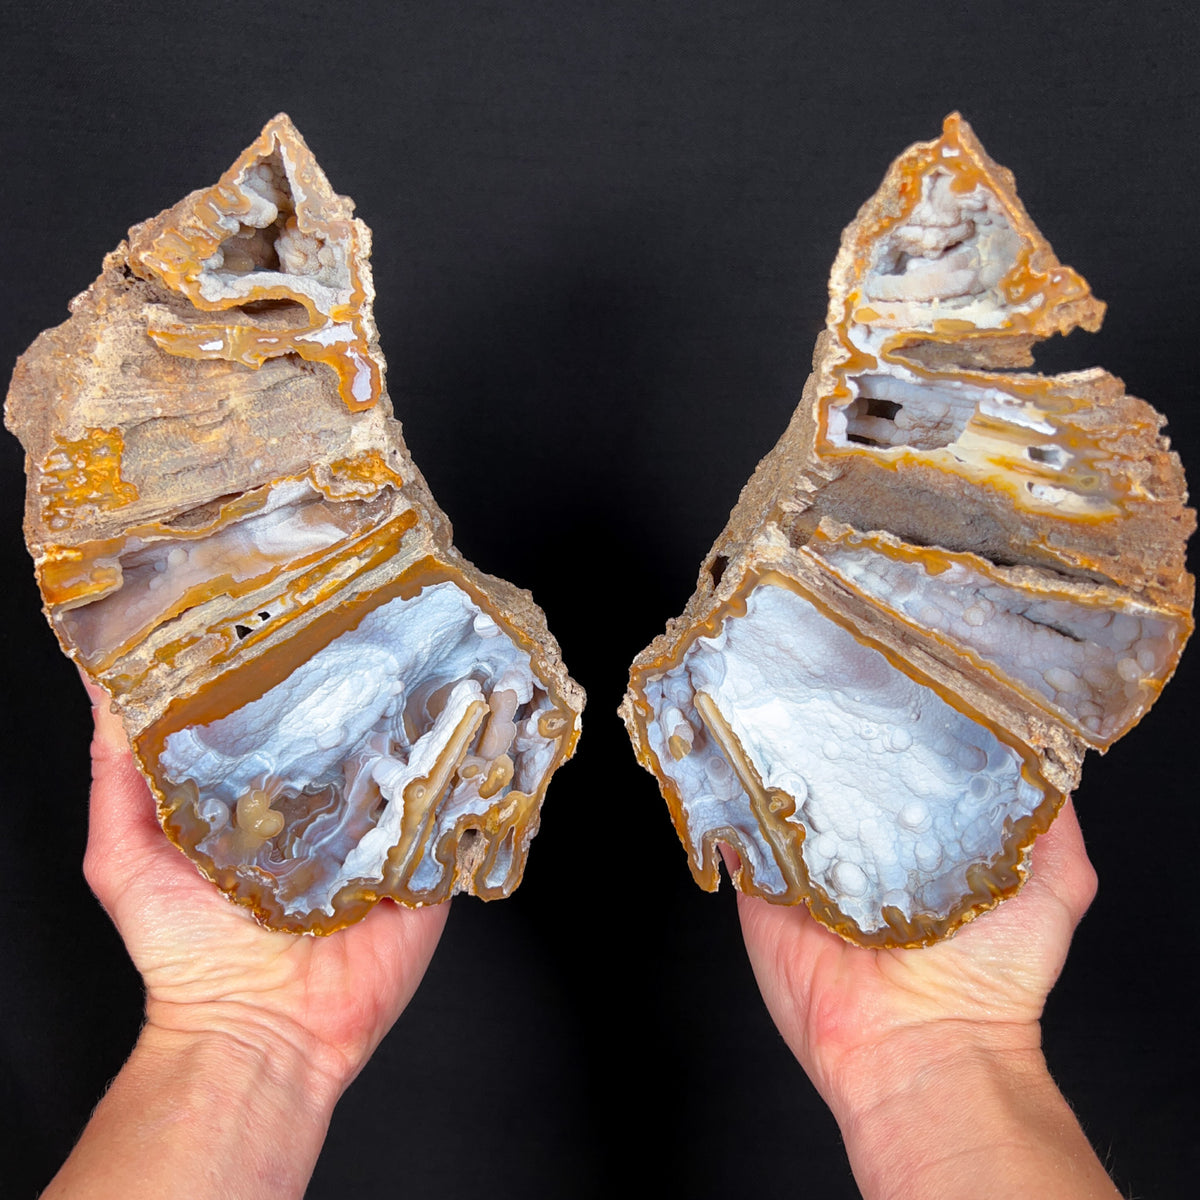 Chalcedony Crystals Inside an Extra Large Fossilized Coral Pair from Florida